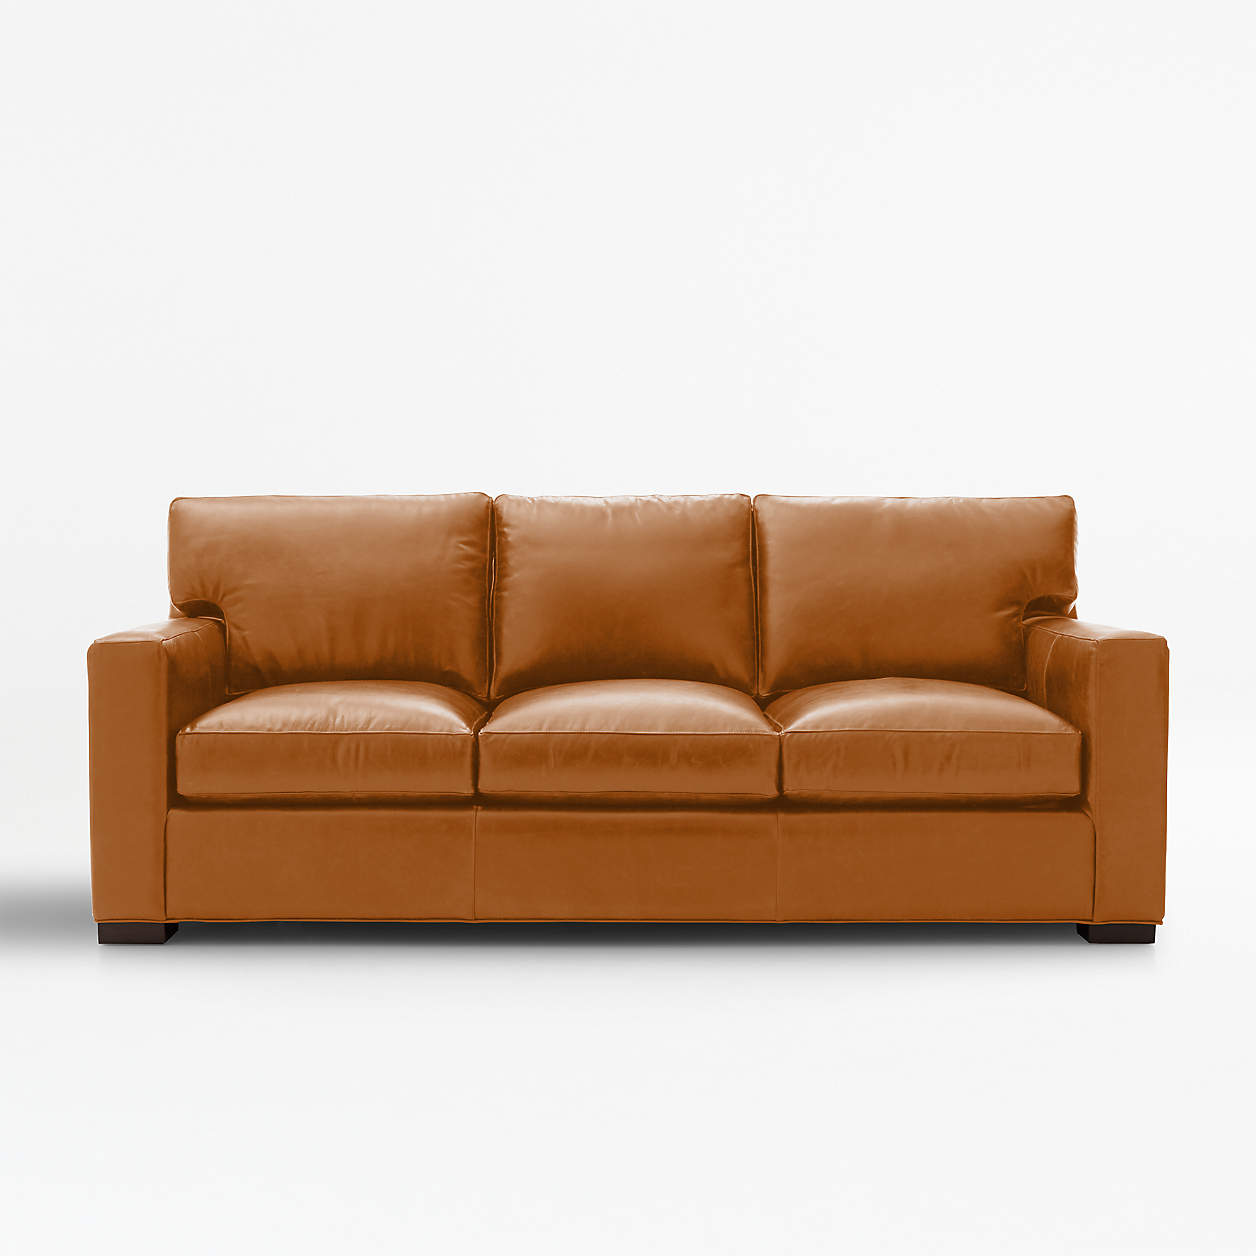 Axis Leather 3-Seat Sofa + Reviews | Crate & Barrel